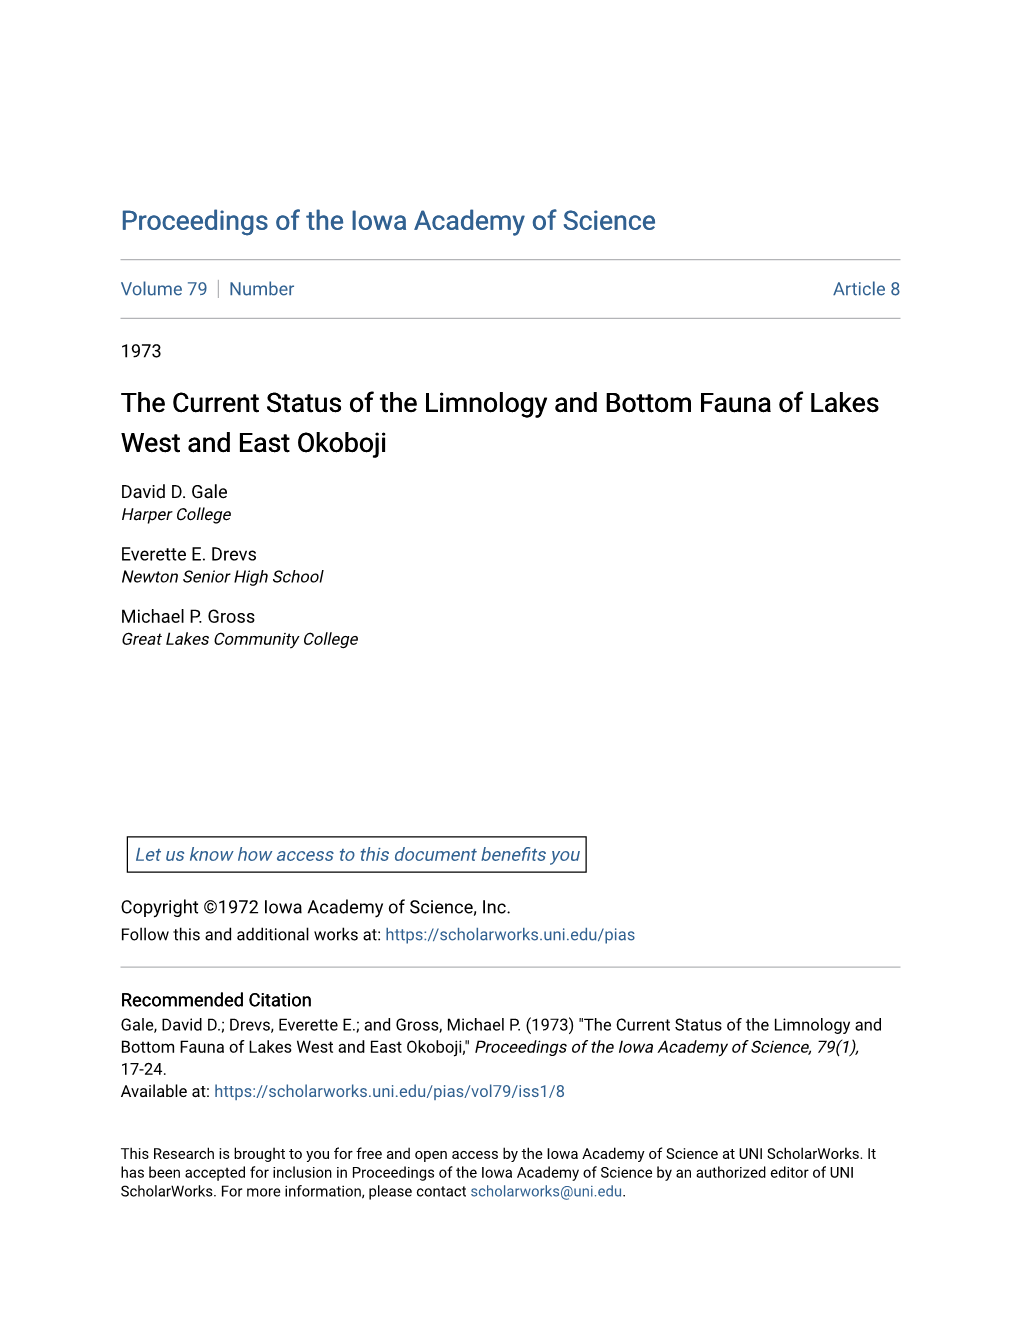 The Current Status of the Limnology and Bottom Fauna of Lakes West and East Okoboji